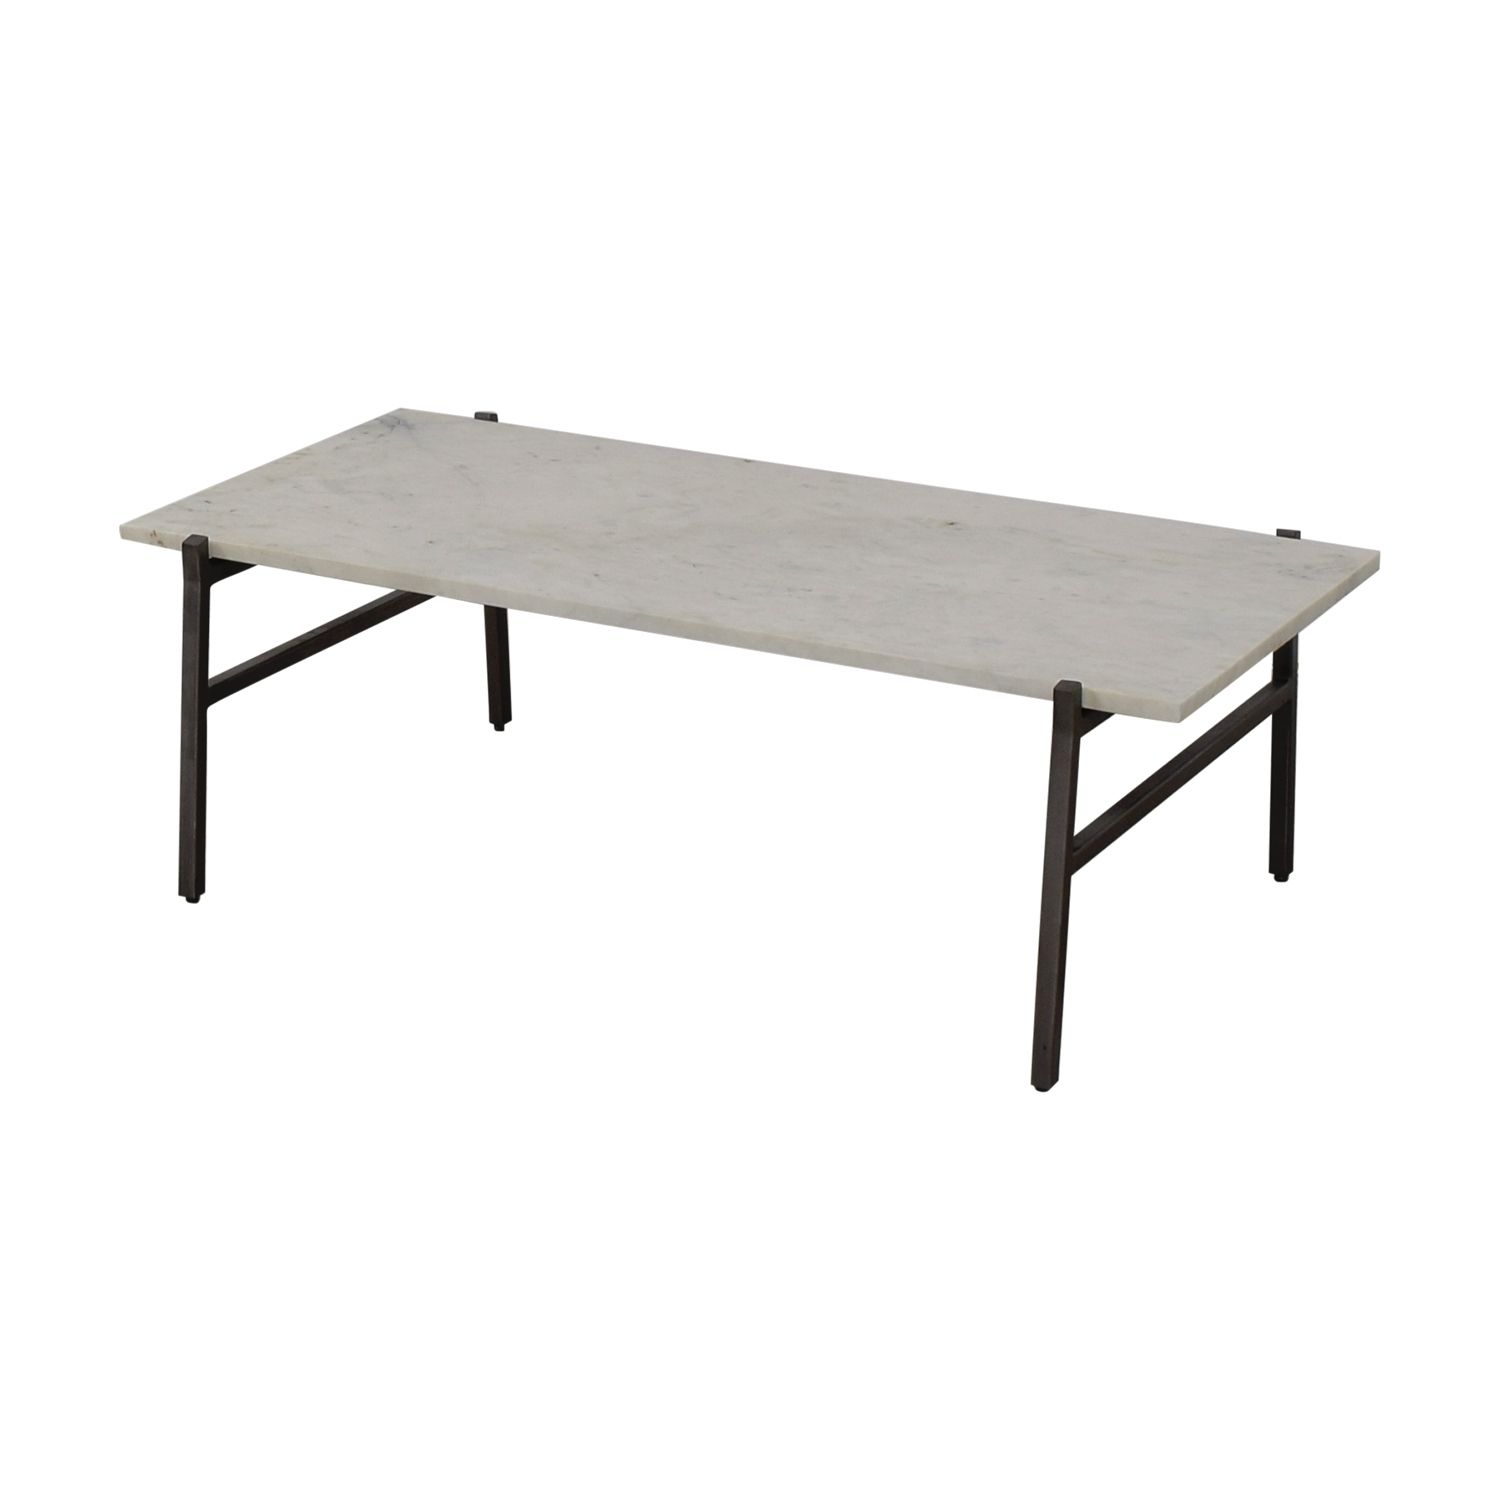 24% Off – Cb2 Cb2 Slab Small Marble Coffee Table With Antiqued Regarding Slab Small Marble Coffee Tables With Antiqued Silver Base (View 4 of 30)